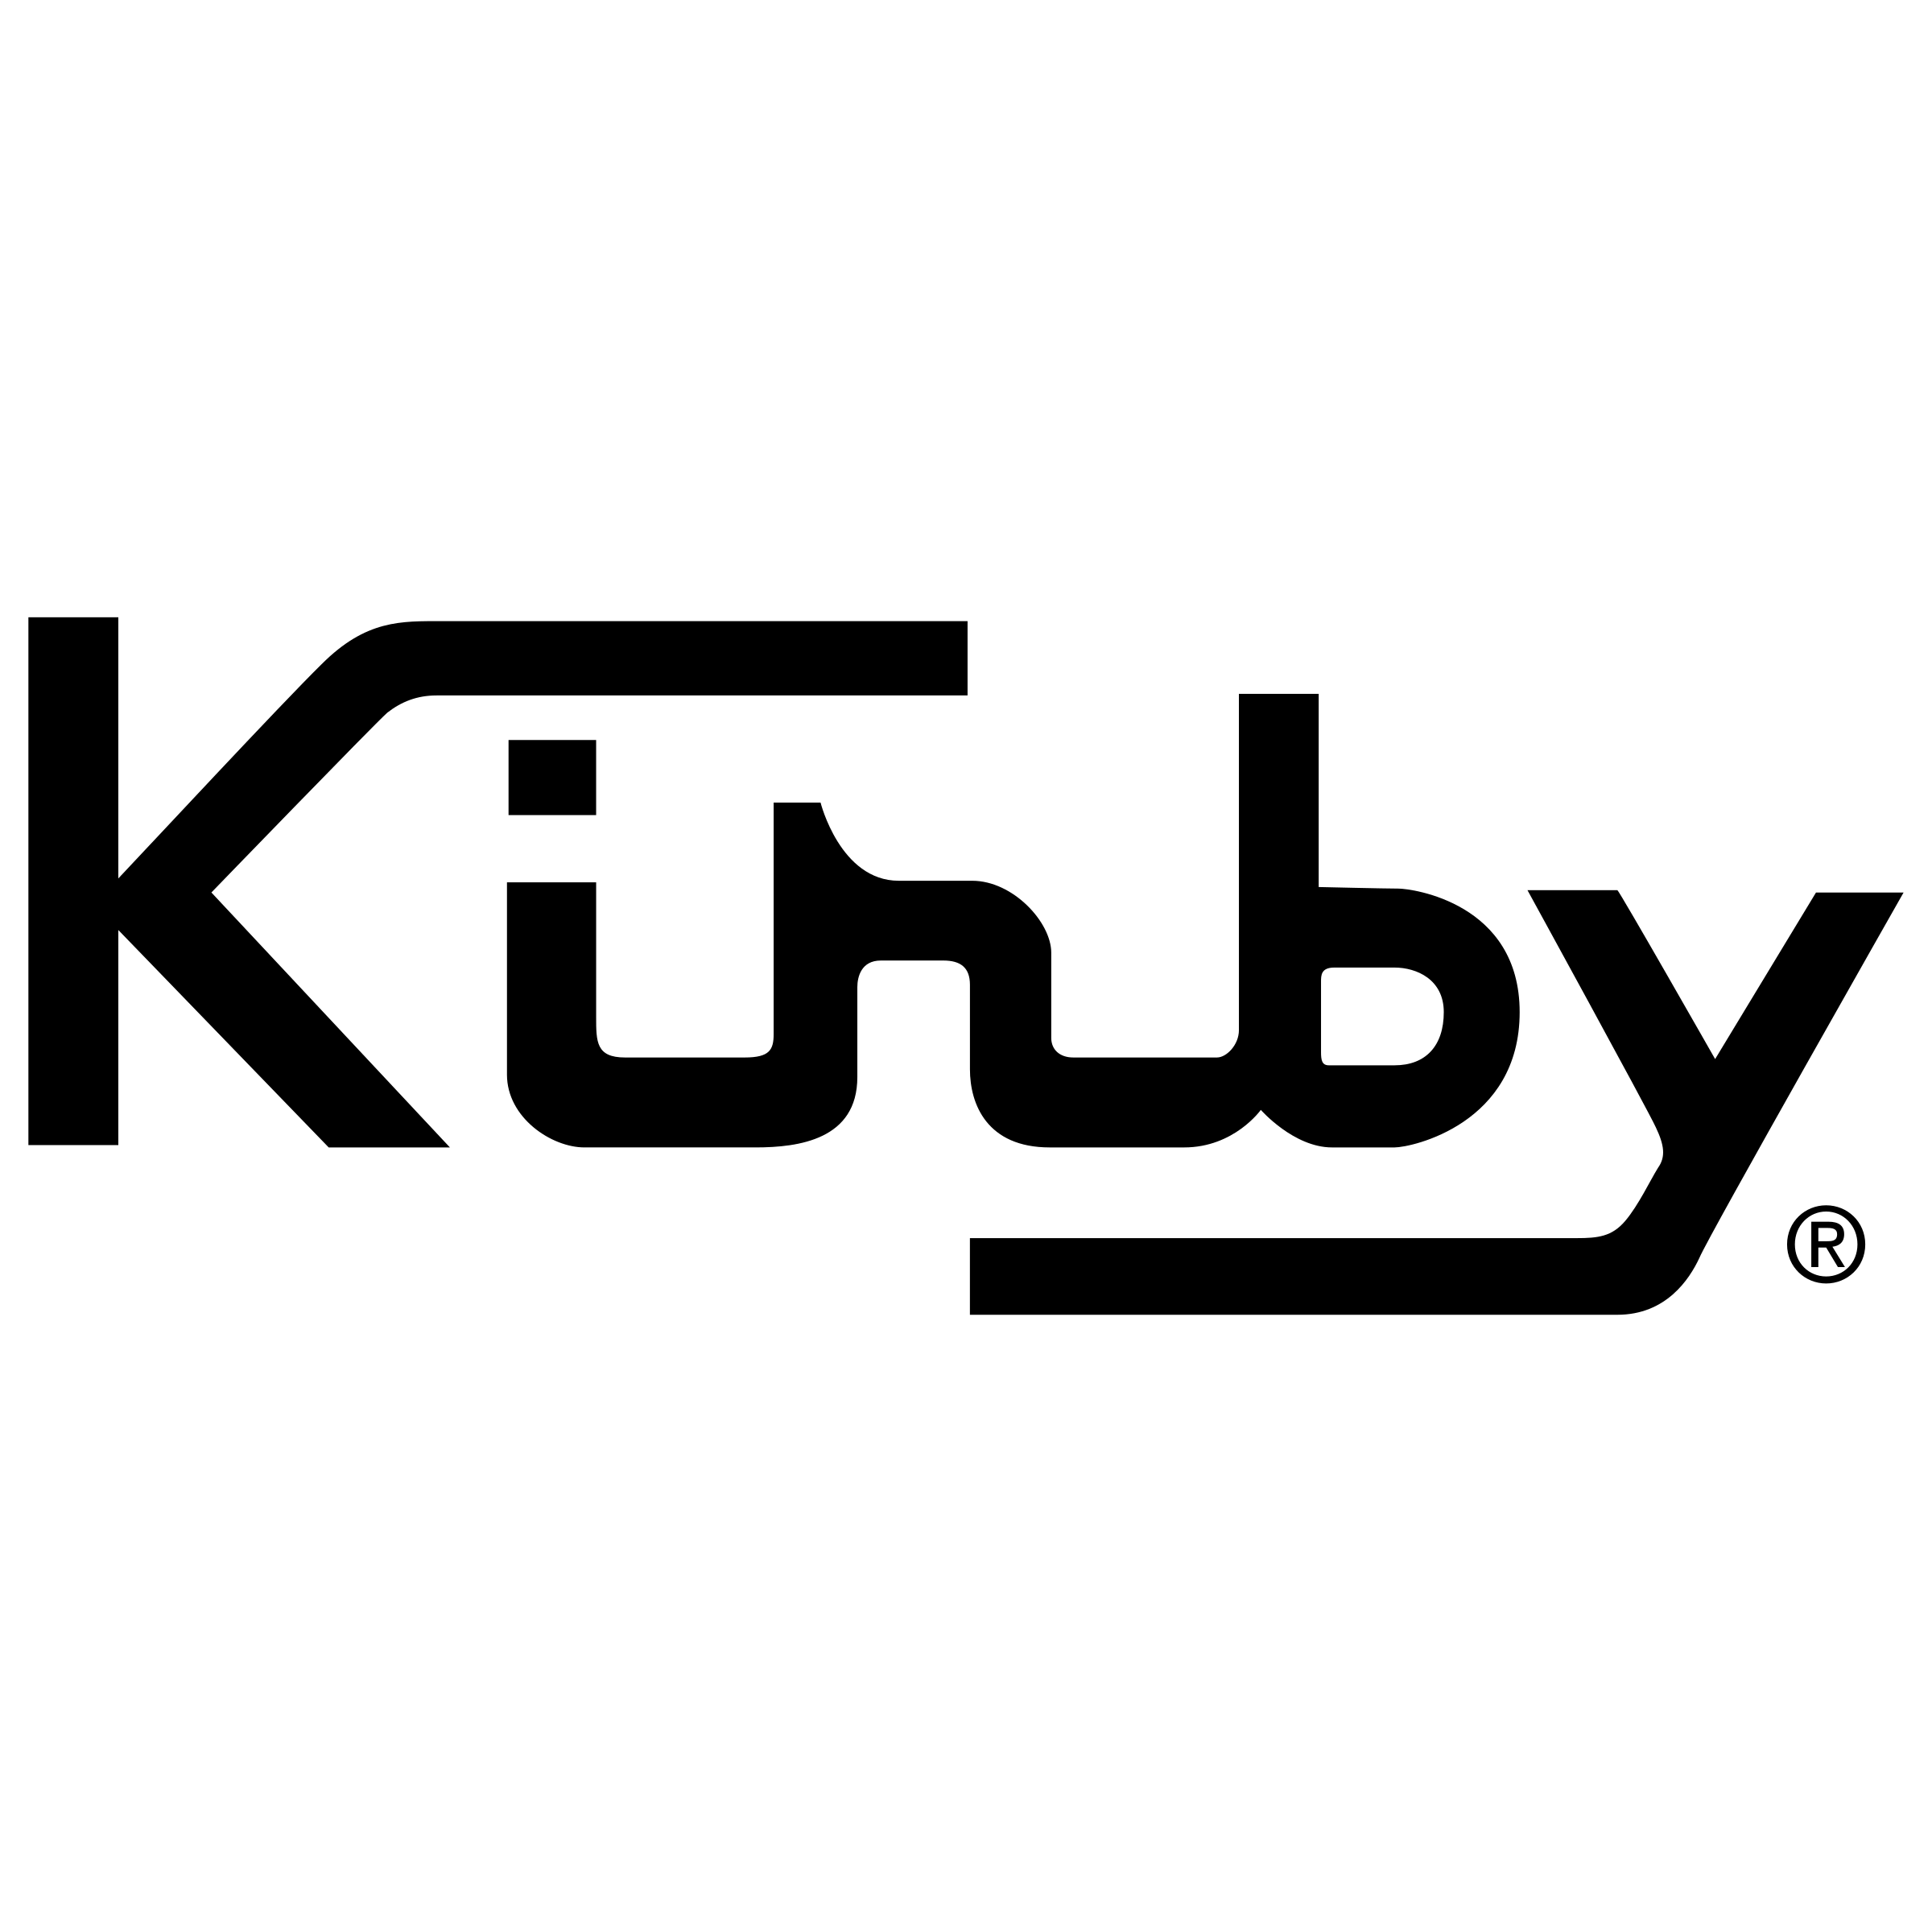 Kirby Logo - Kirby Logo PNG Transparent & SVG Vector - Freebie Supply